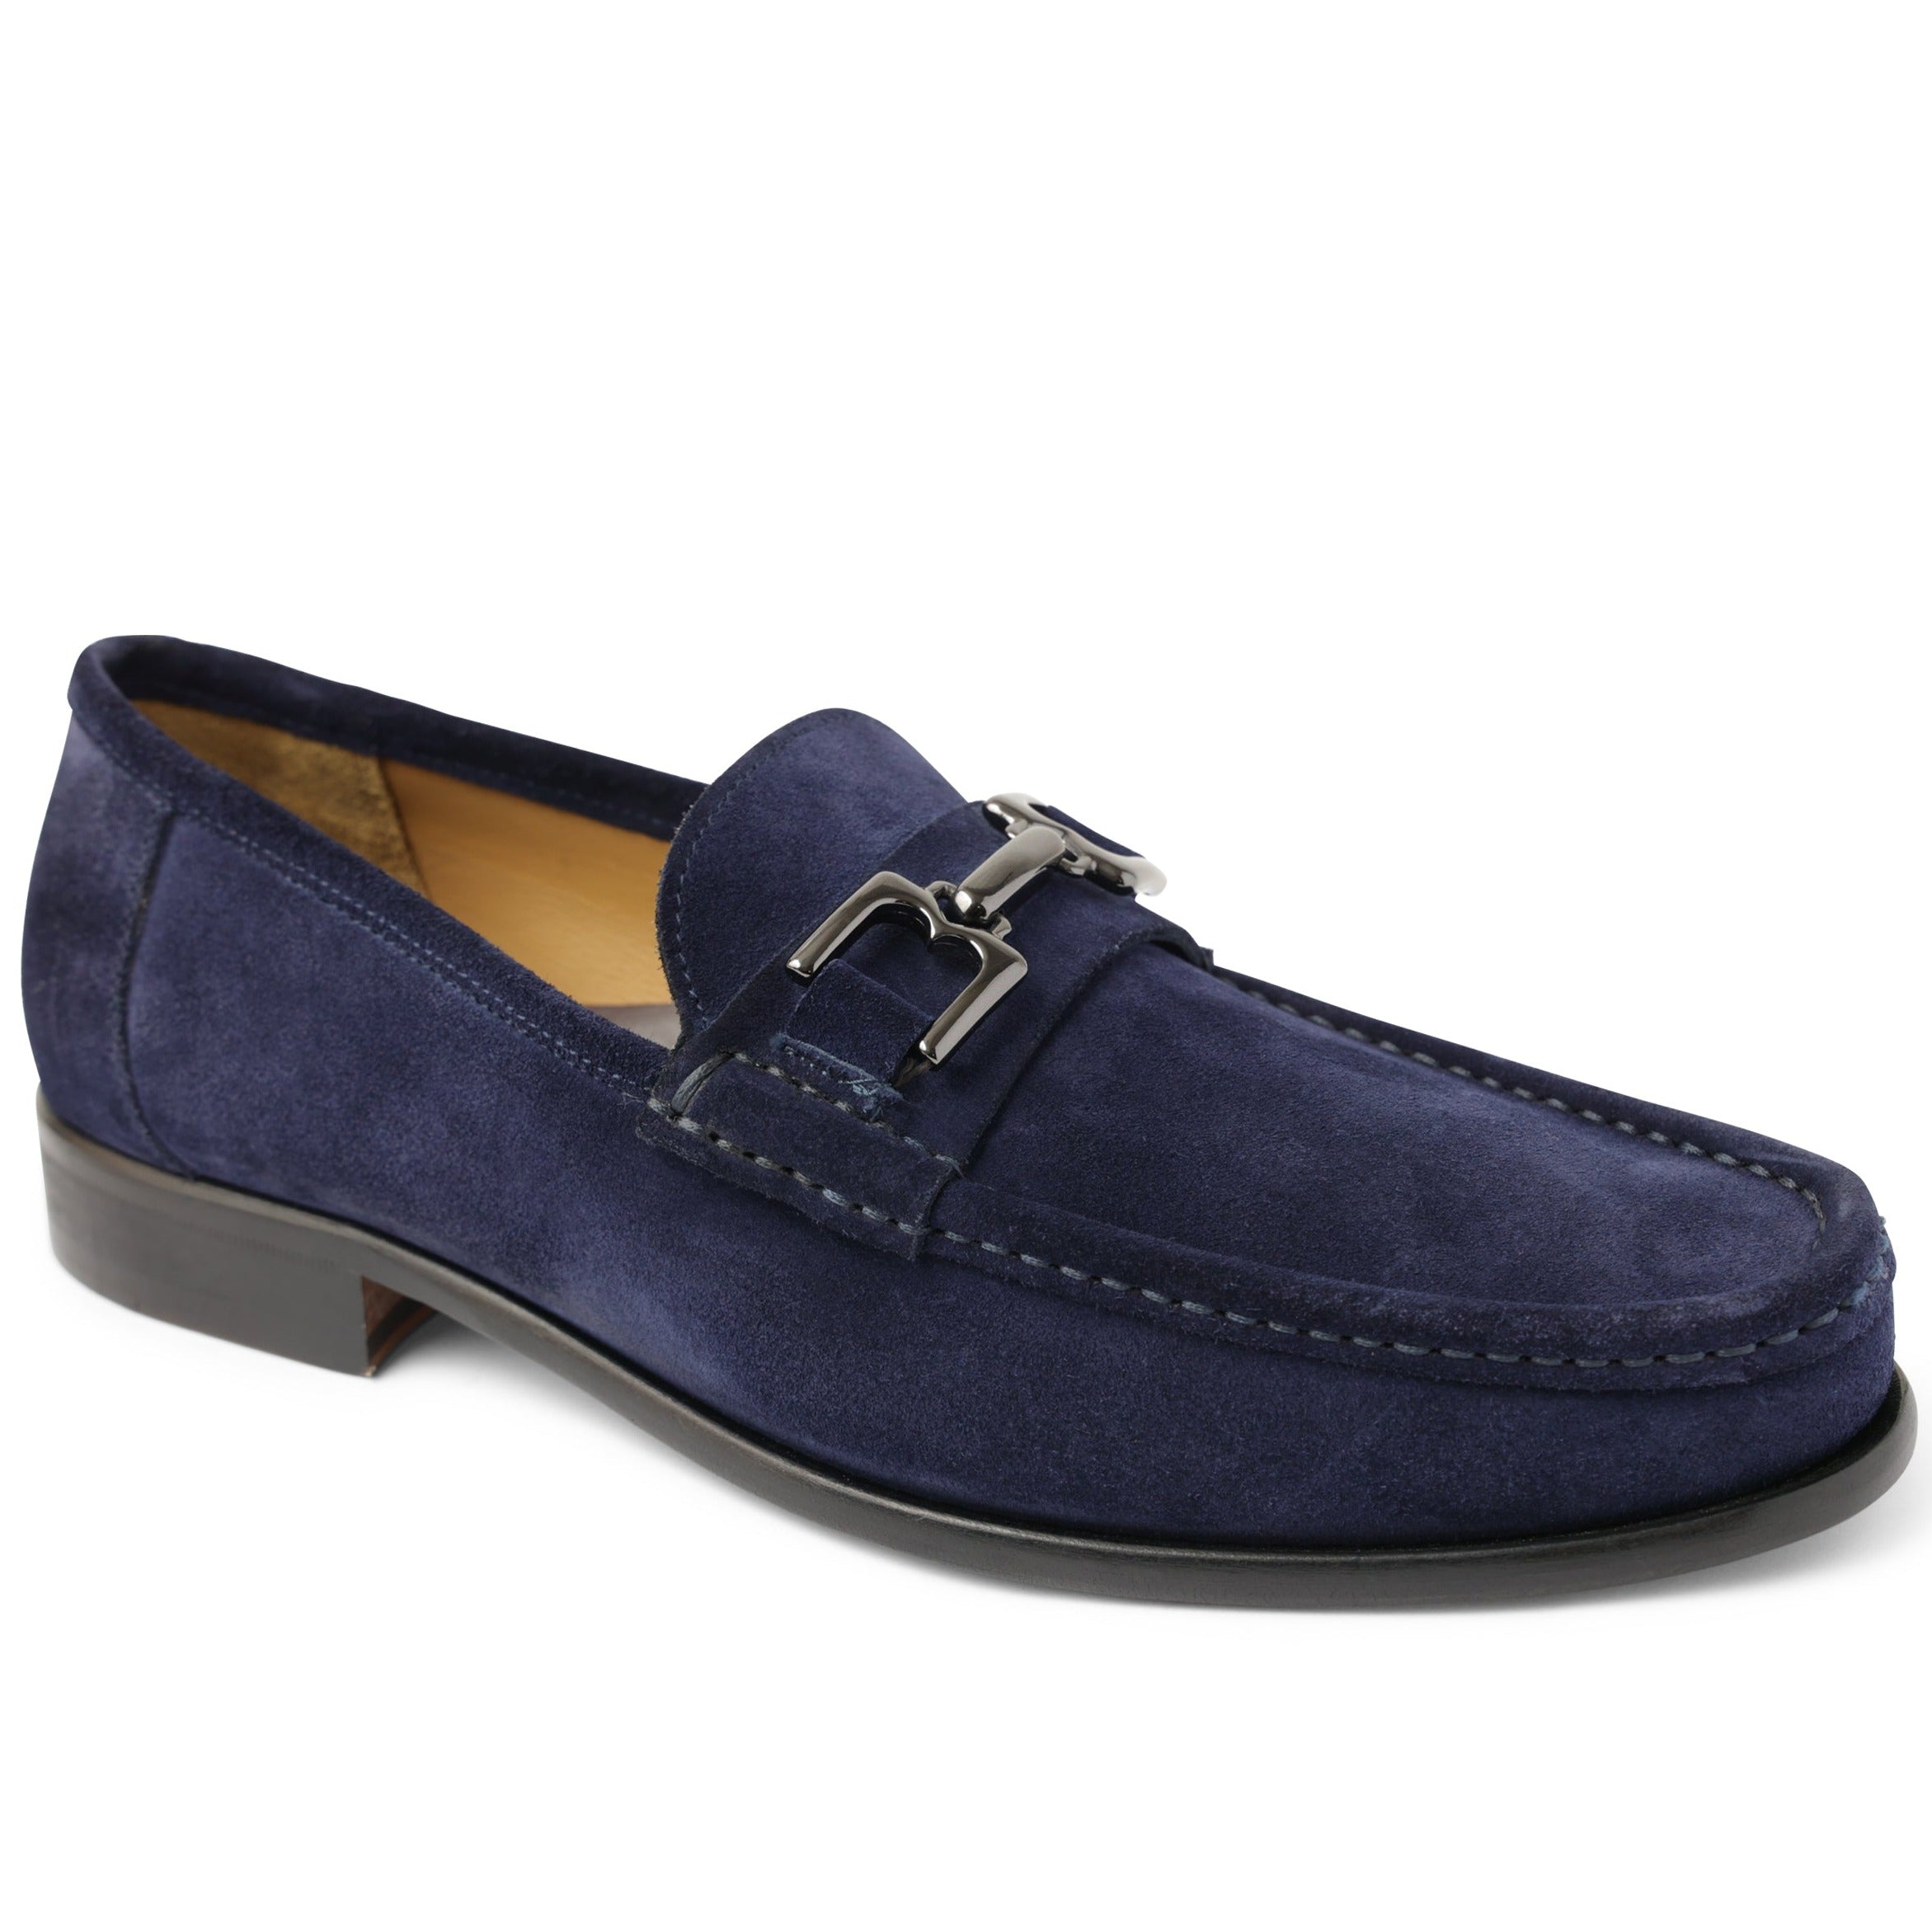 Trieste Classic Leather Moccasin - Navy Suede – Bruno Magli